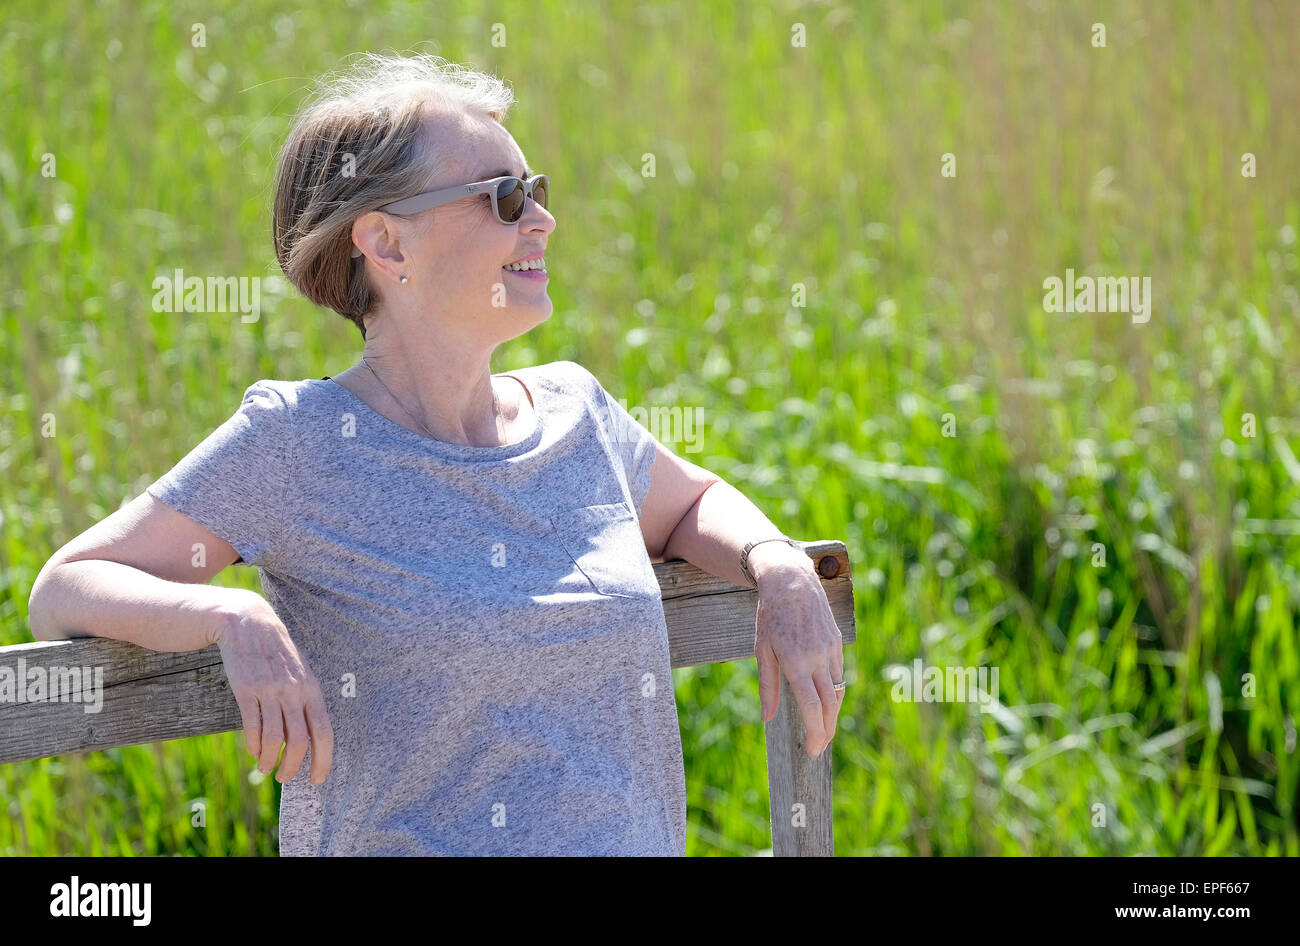 senior woman leaning on timber railing fence posts Stock Photo